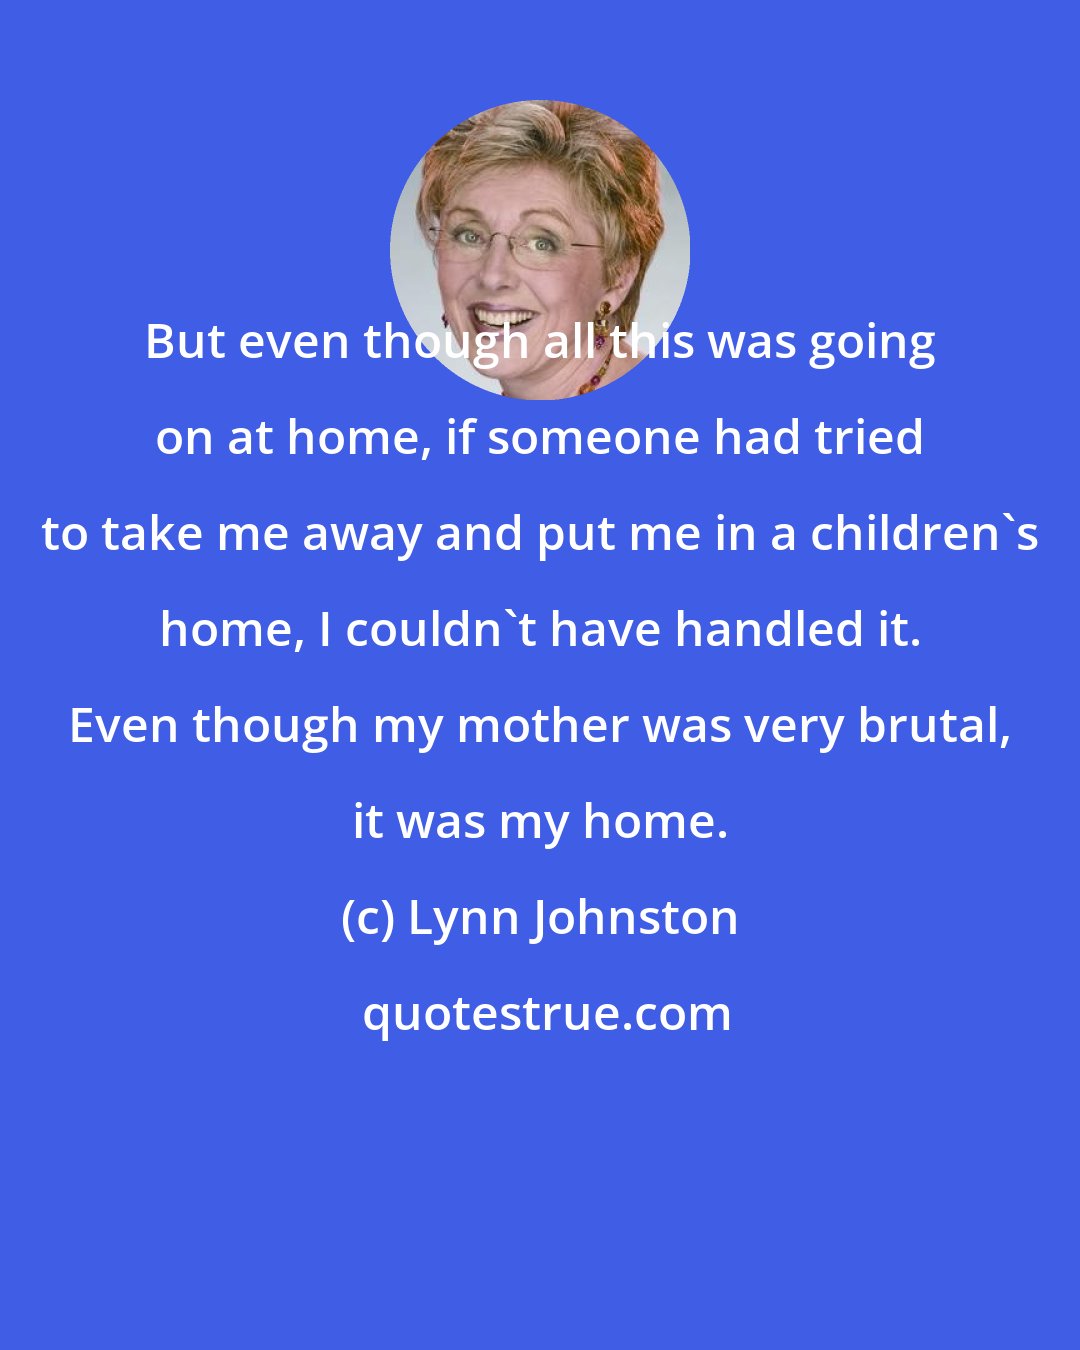 Lynn Johnston: But even though all this was going on at home, if someone had tried to take me away and put me in a children's home, I couldn't have handled it. Even though my mother was very brutal, it was my home.